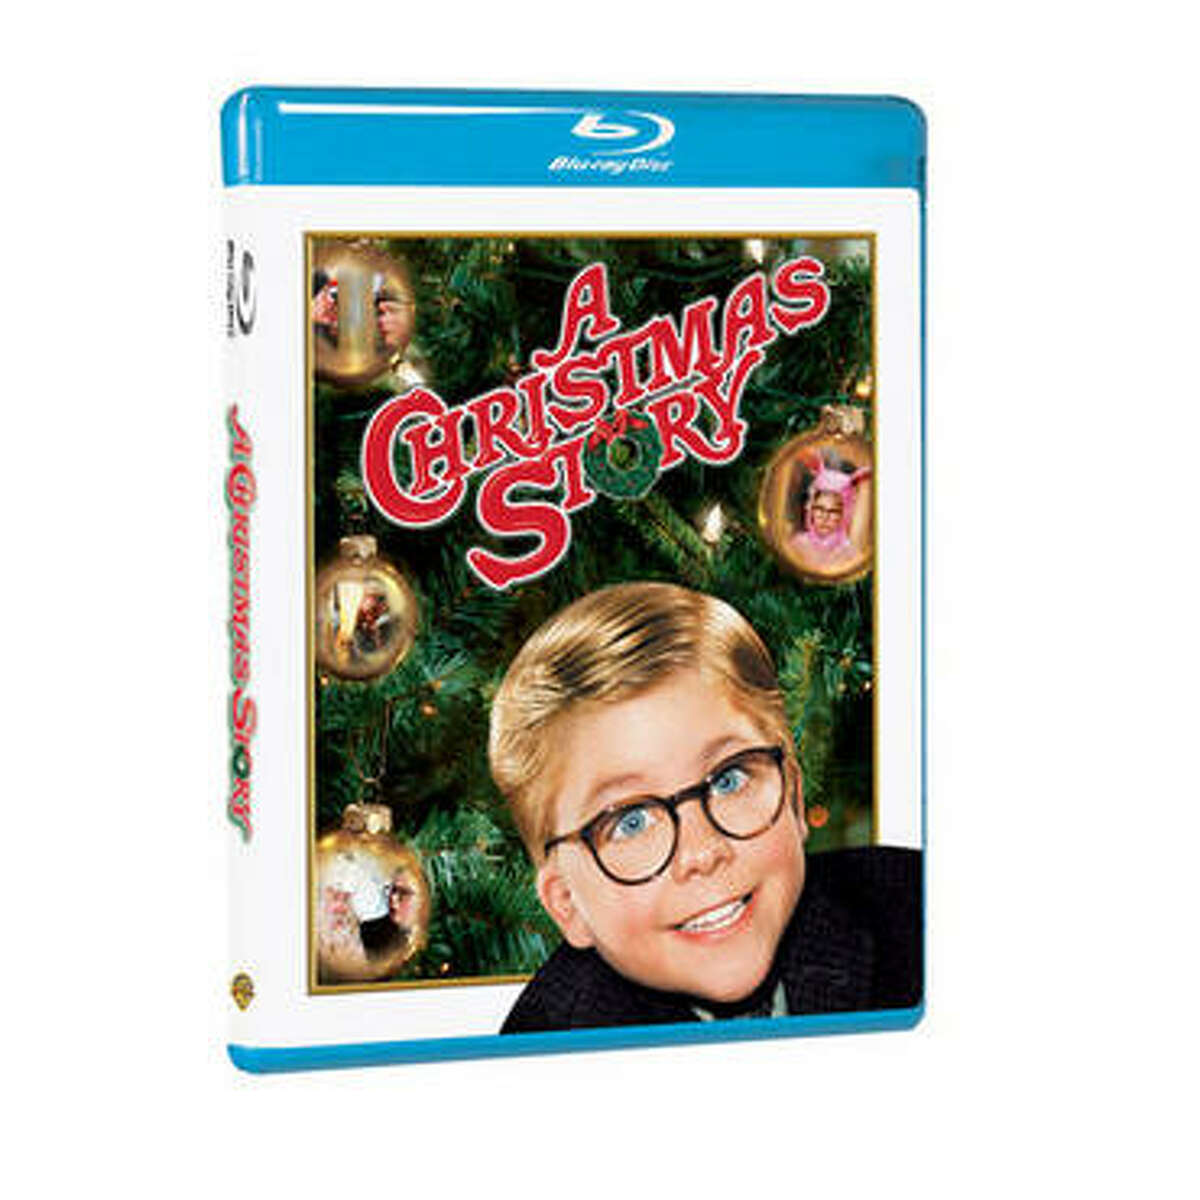 "A Christmas Story' made its debut on Nov. 18, 1983, but the story had been in the works for 10 years. Now considered a holiday classic, in recent years television stations have aired a marathon of the movie where it shows for 24 hours before Christmas. The movie is celebrating 30 years. Express-News Staff Writer René Guzman presents some fun facts you may not have known.